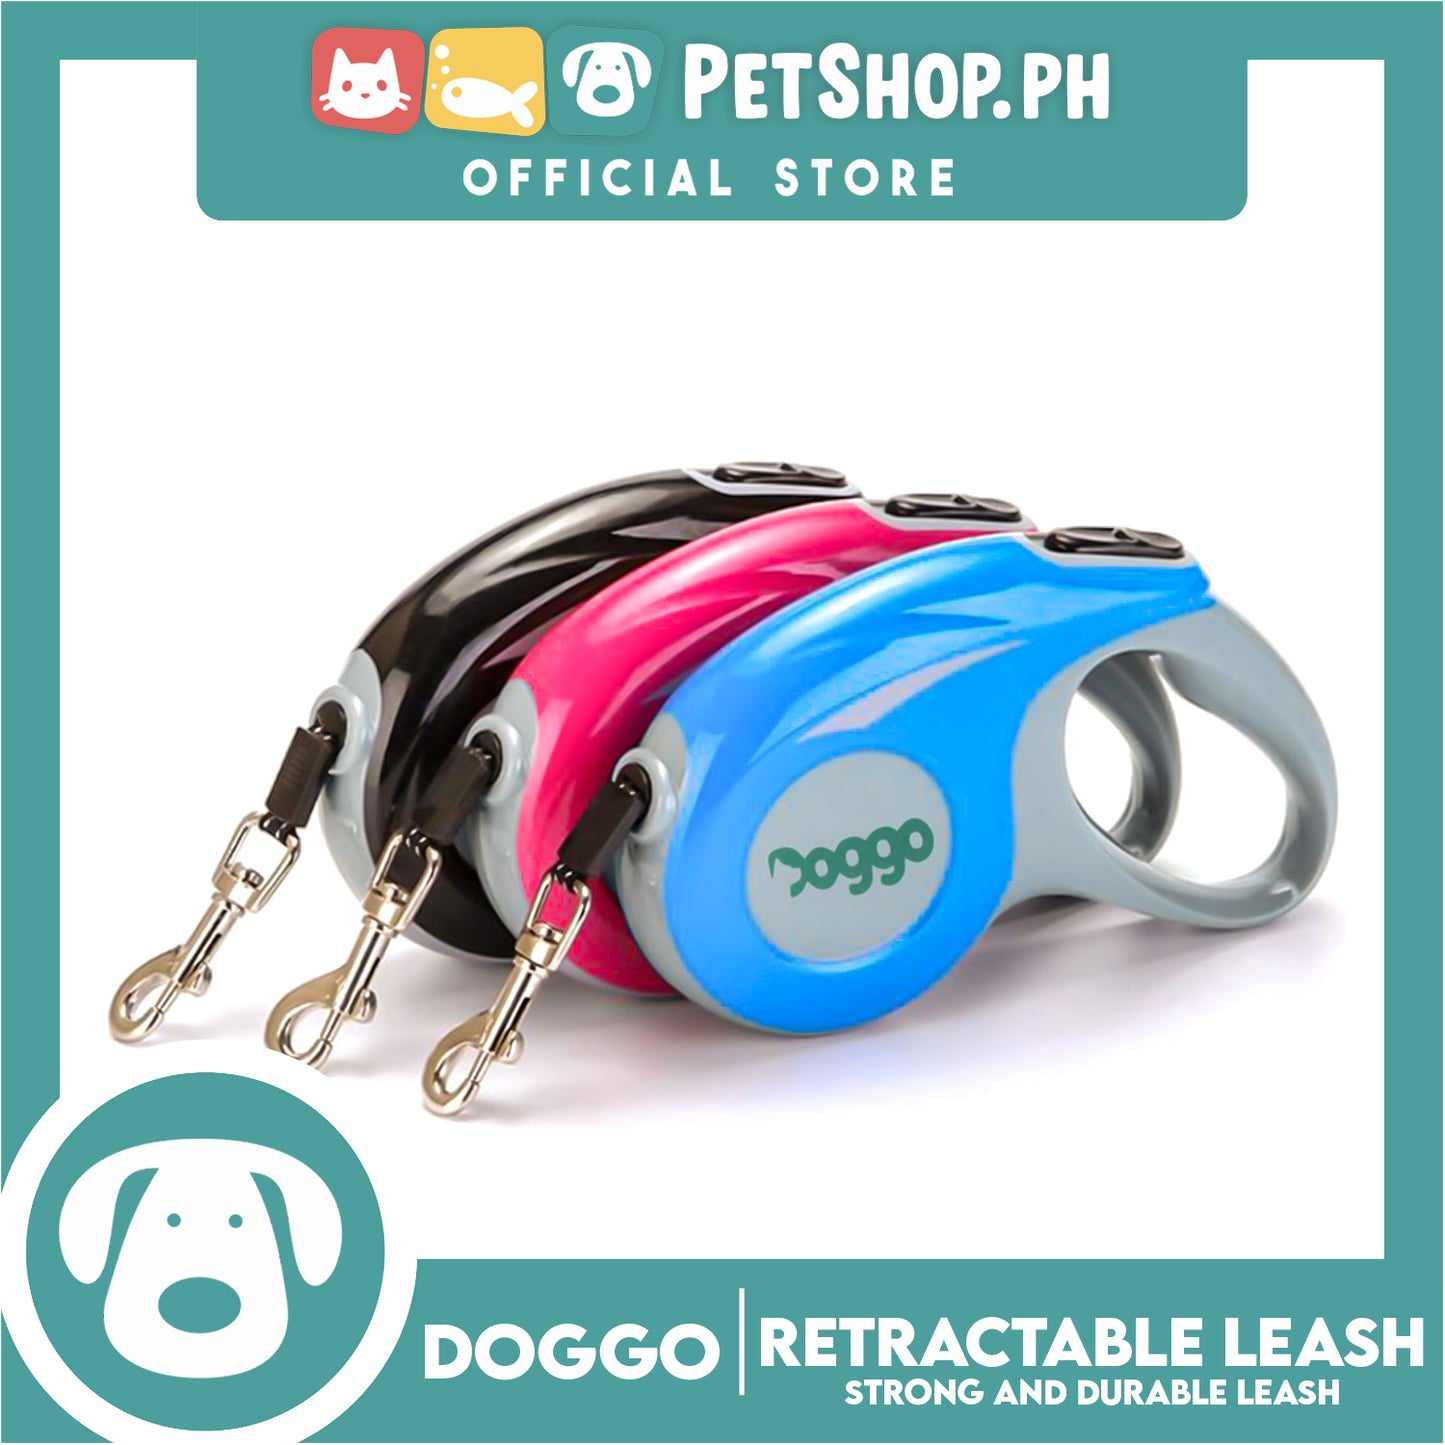 Doggo Retractable Leash 5M (Black) Strong And Durable, In Comfort And Control Running And Convenient